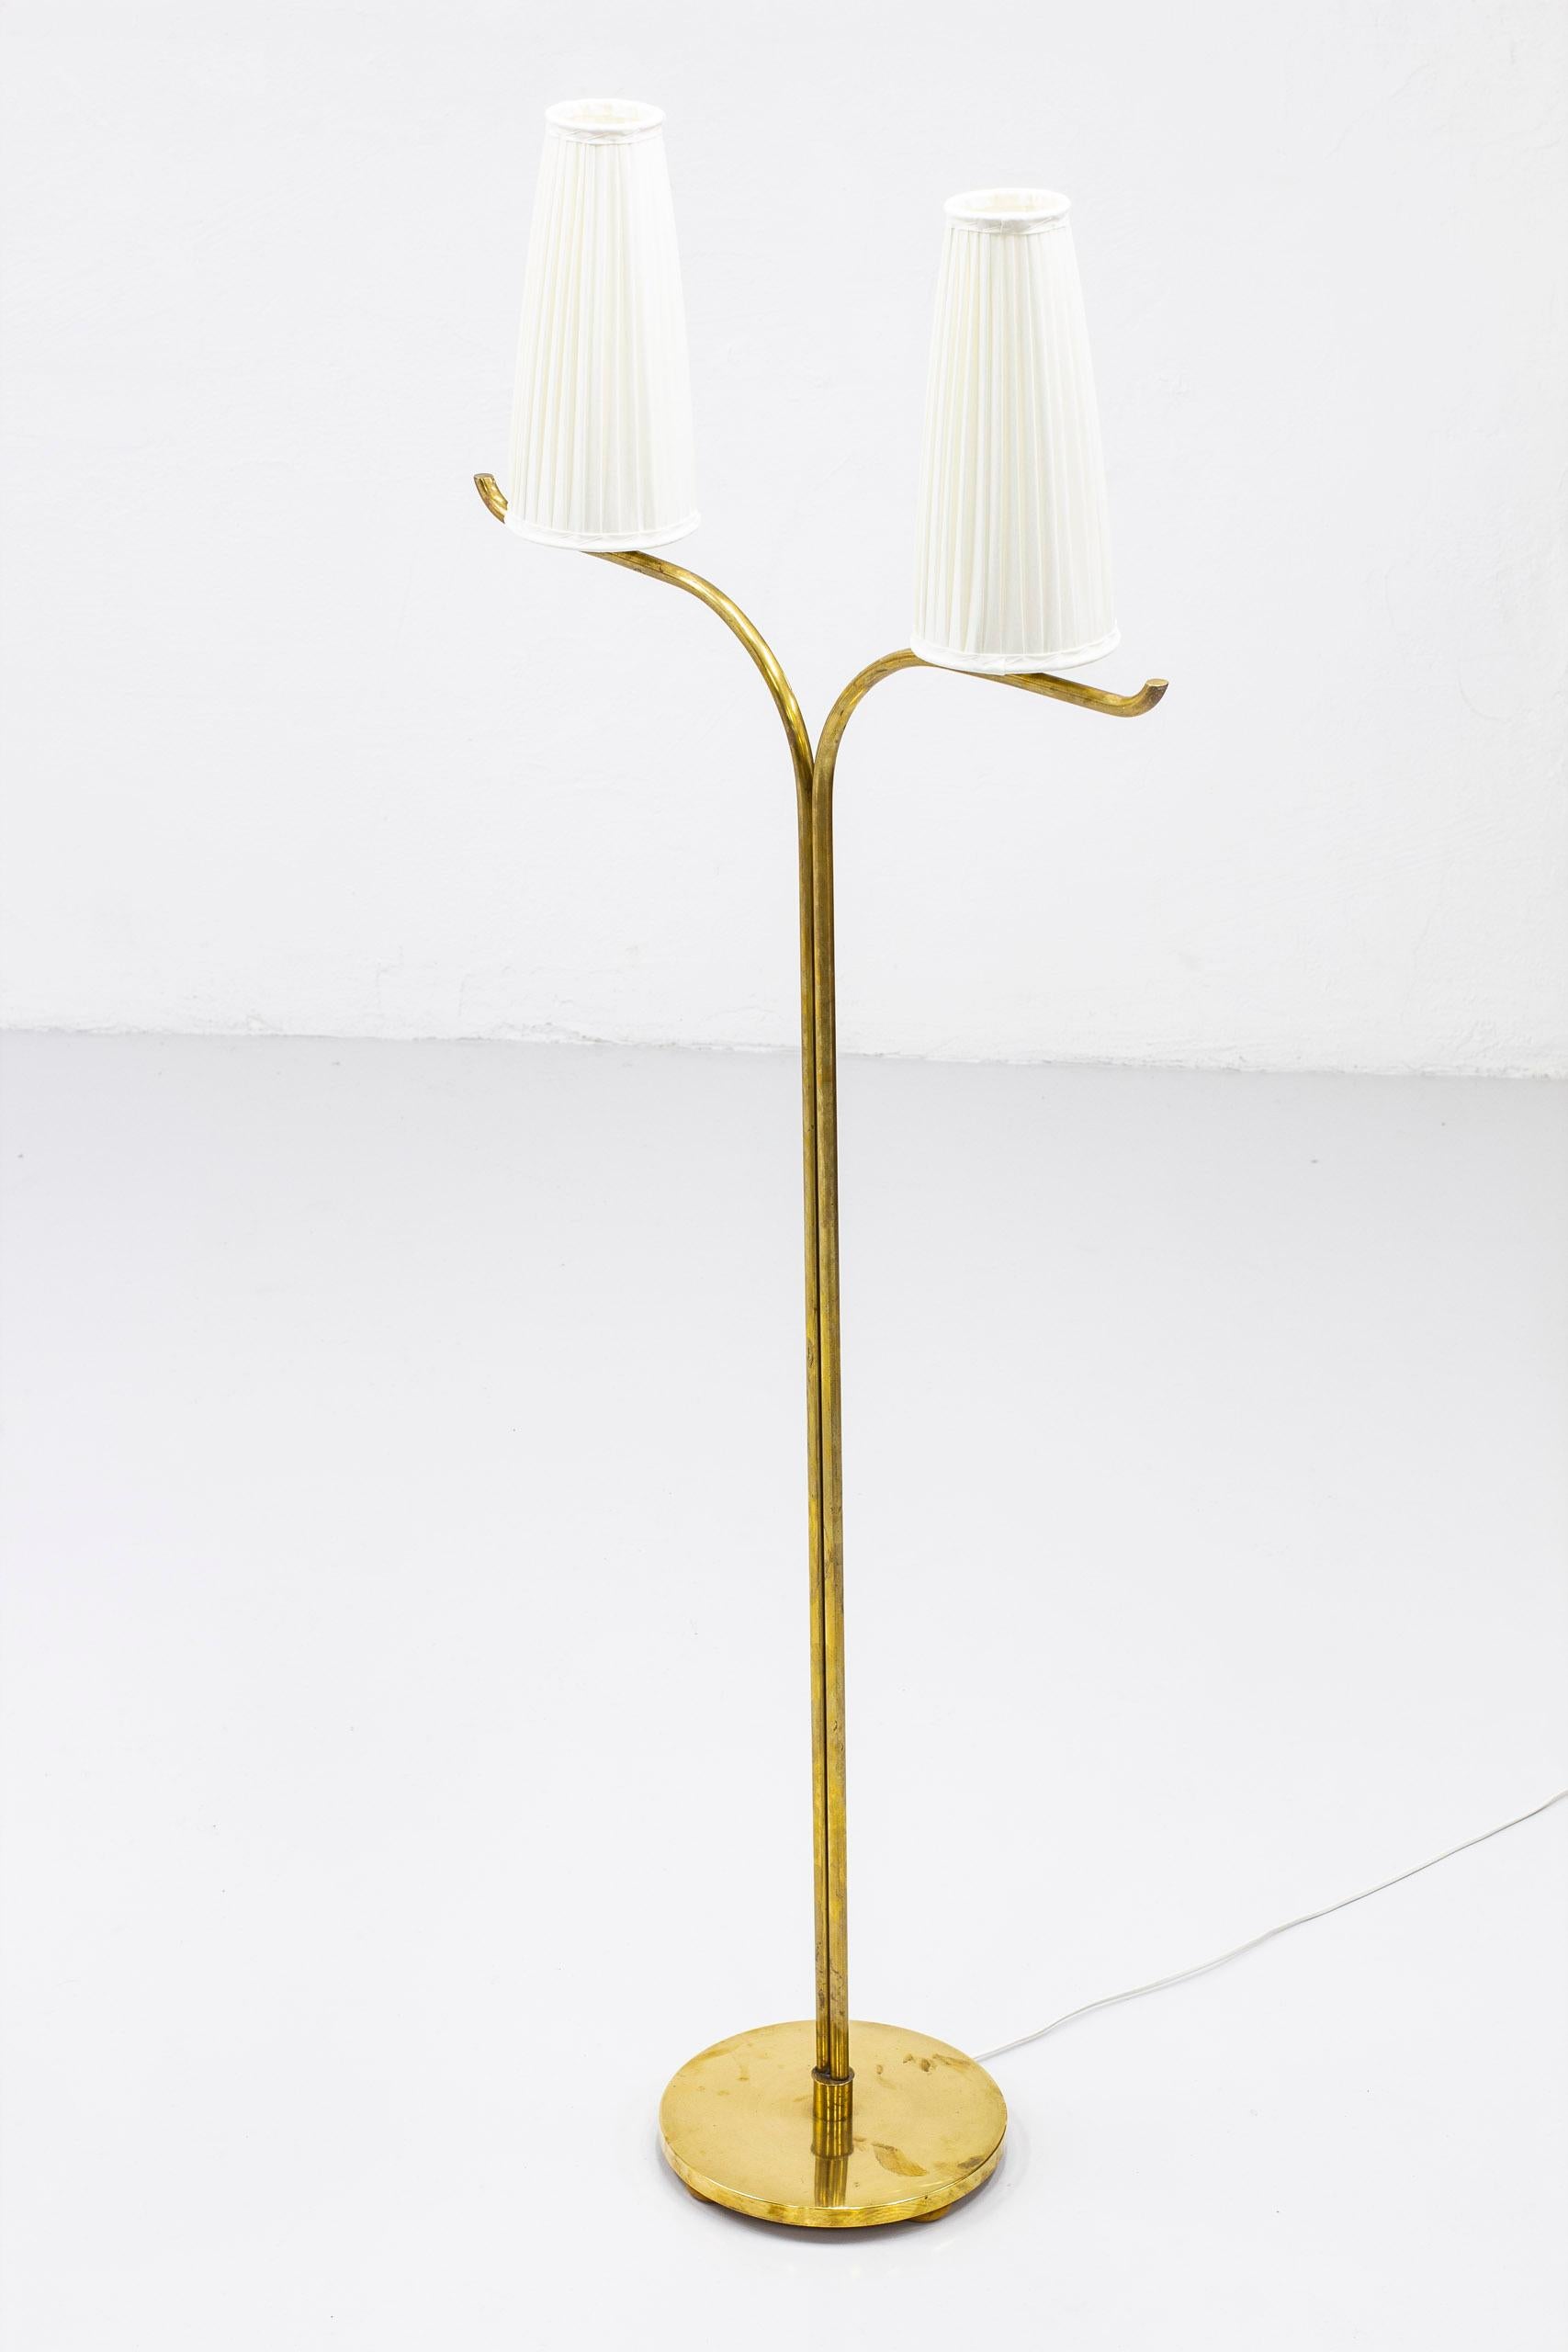 Swedish modern floor lamp attributed to Gustaf Axel Berg. Produced by his own workshop in Stockholm, Sweden in the 1940s. Made from polished brass and shades with new hand sewn chintz fabric in creme white. Light switch on the chord. Very good